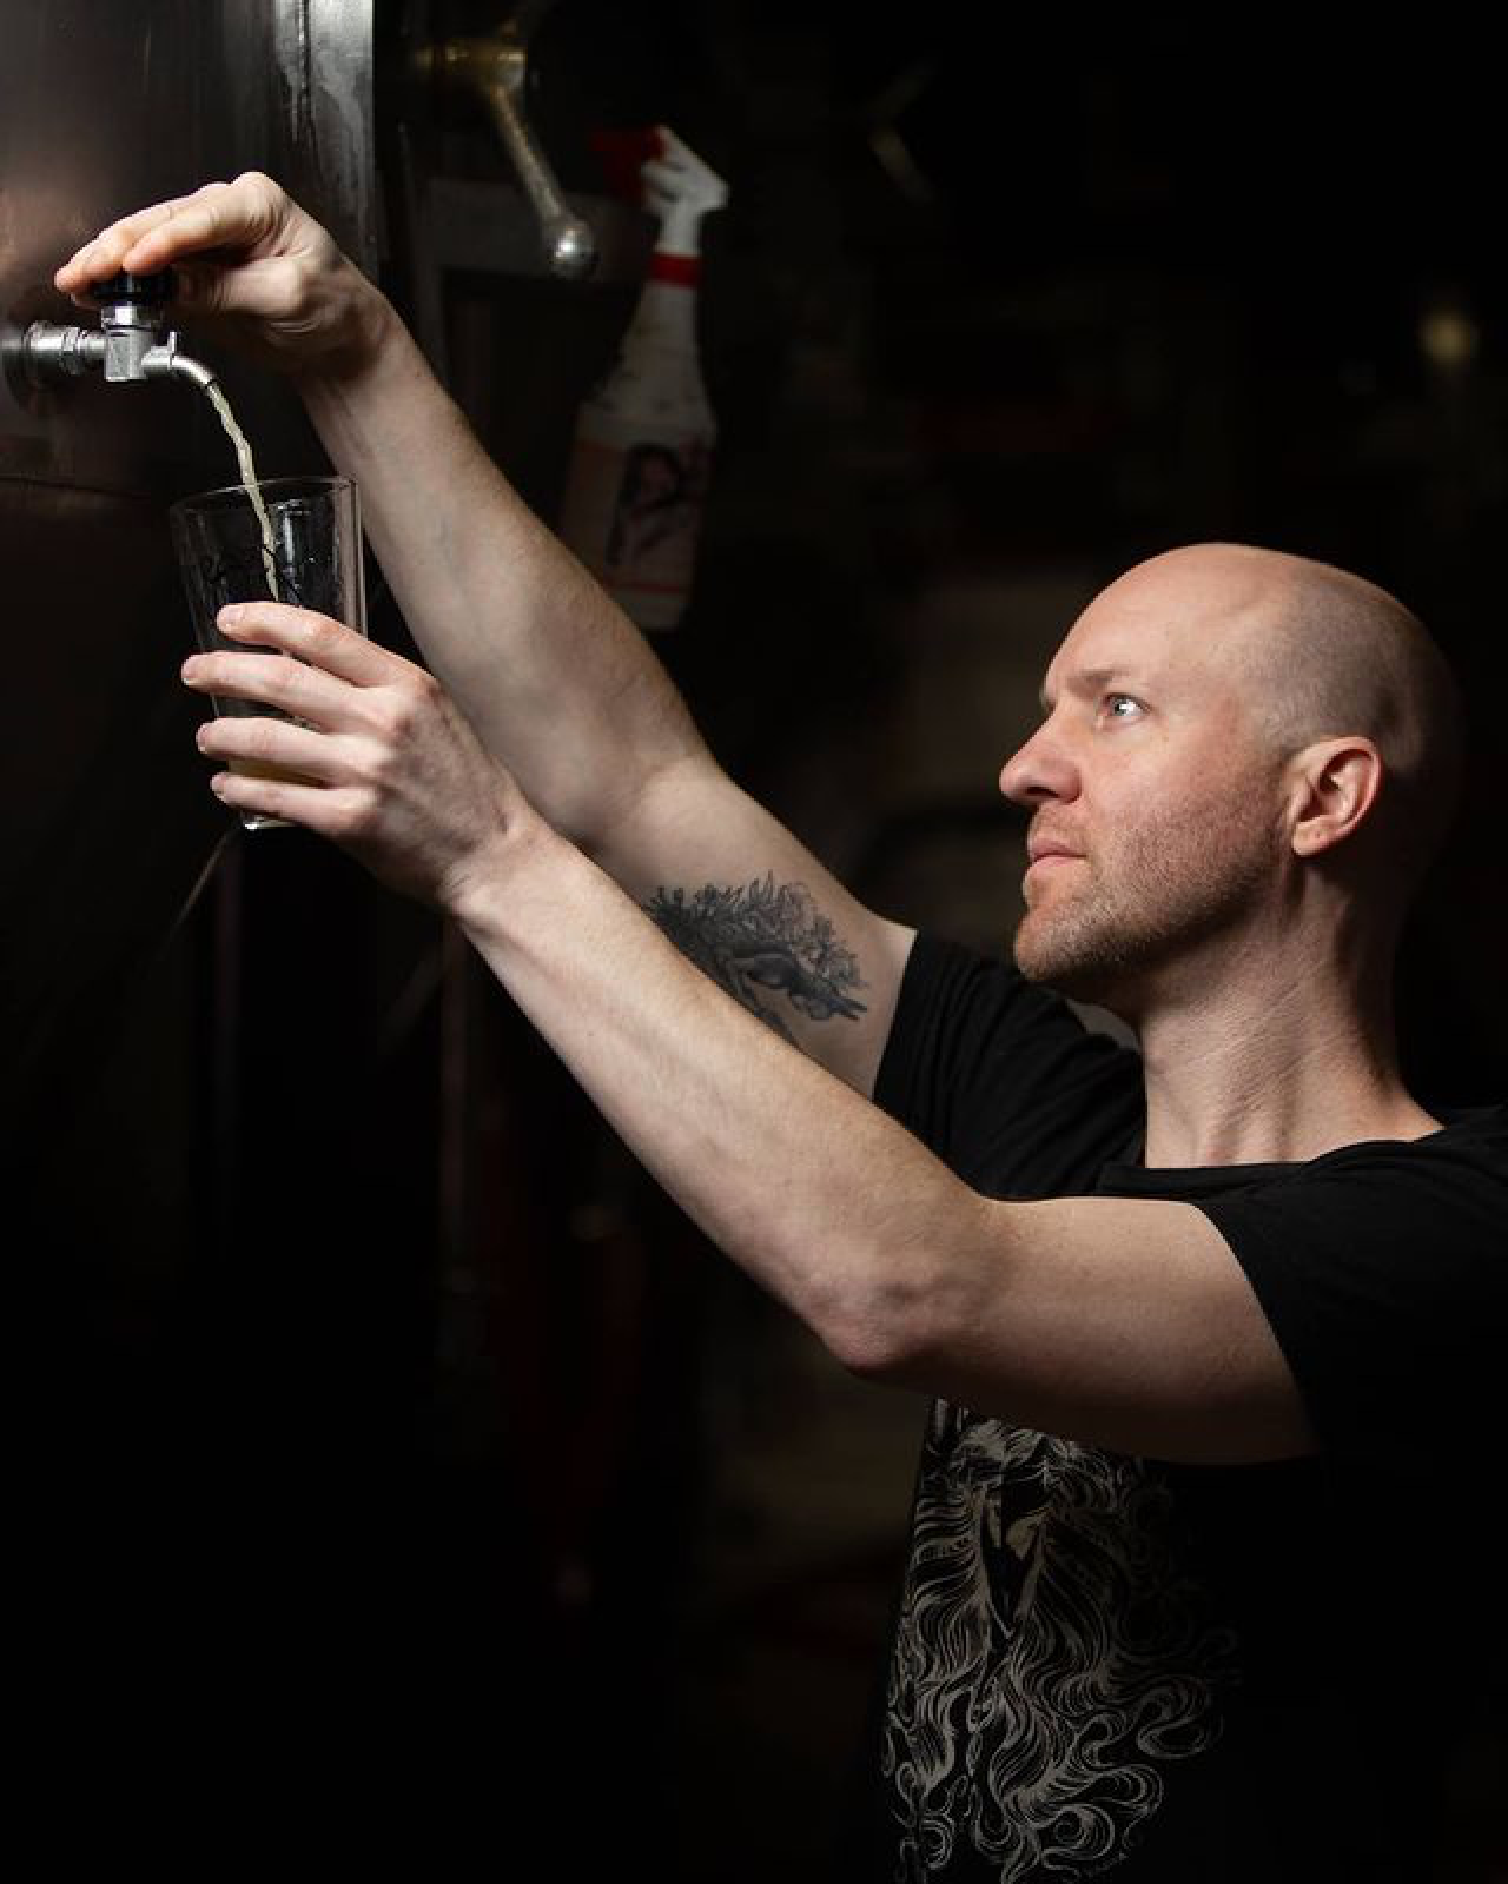 Brian Stumke of Stillwater pouring from the tap.